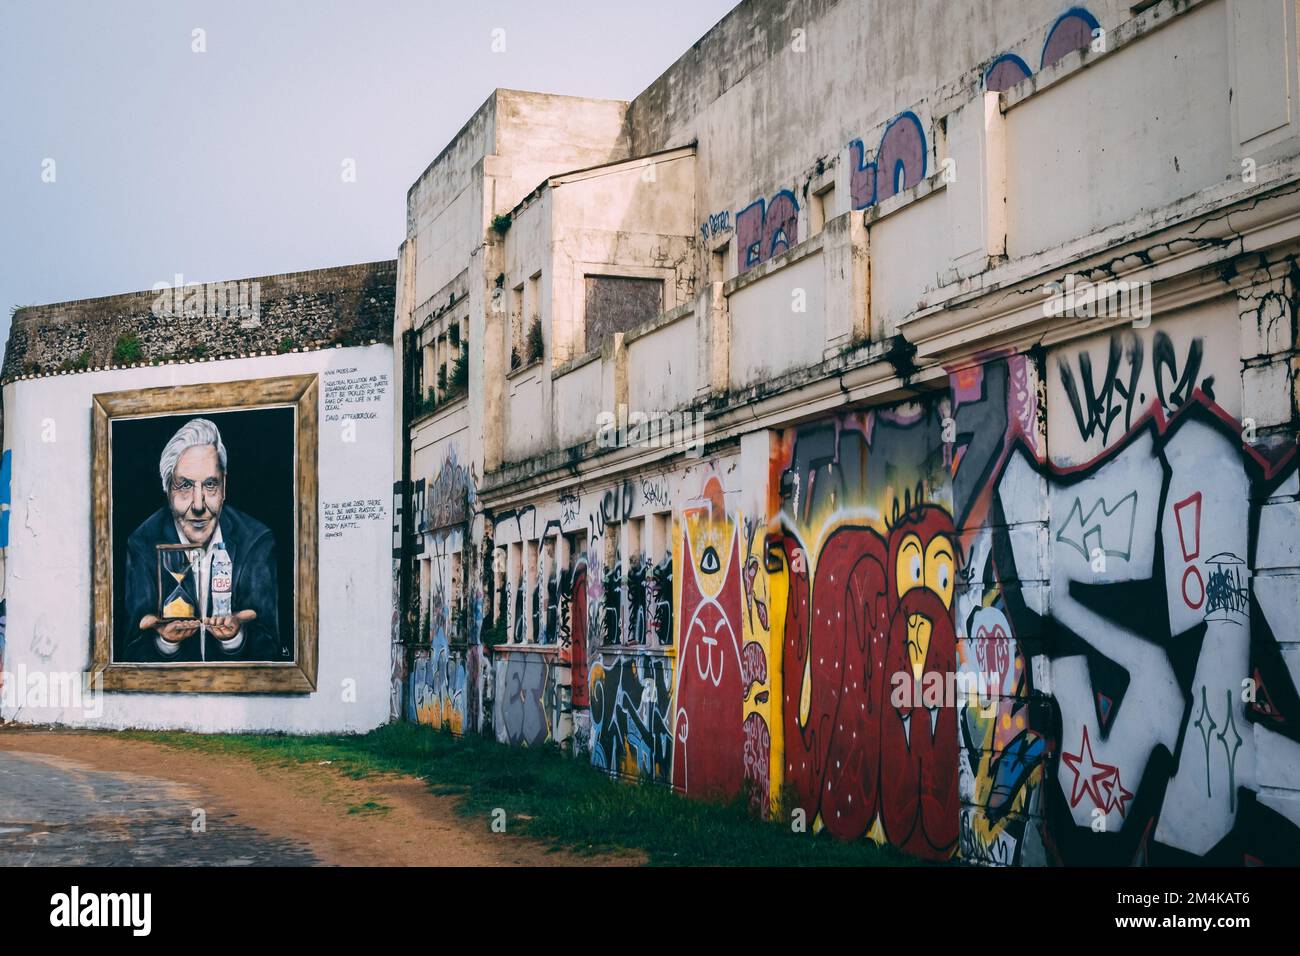 An artwork of David Attenborough on a large wall in Margate, England, United Kingdom Stock Photo